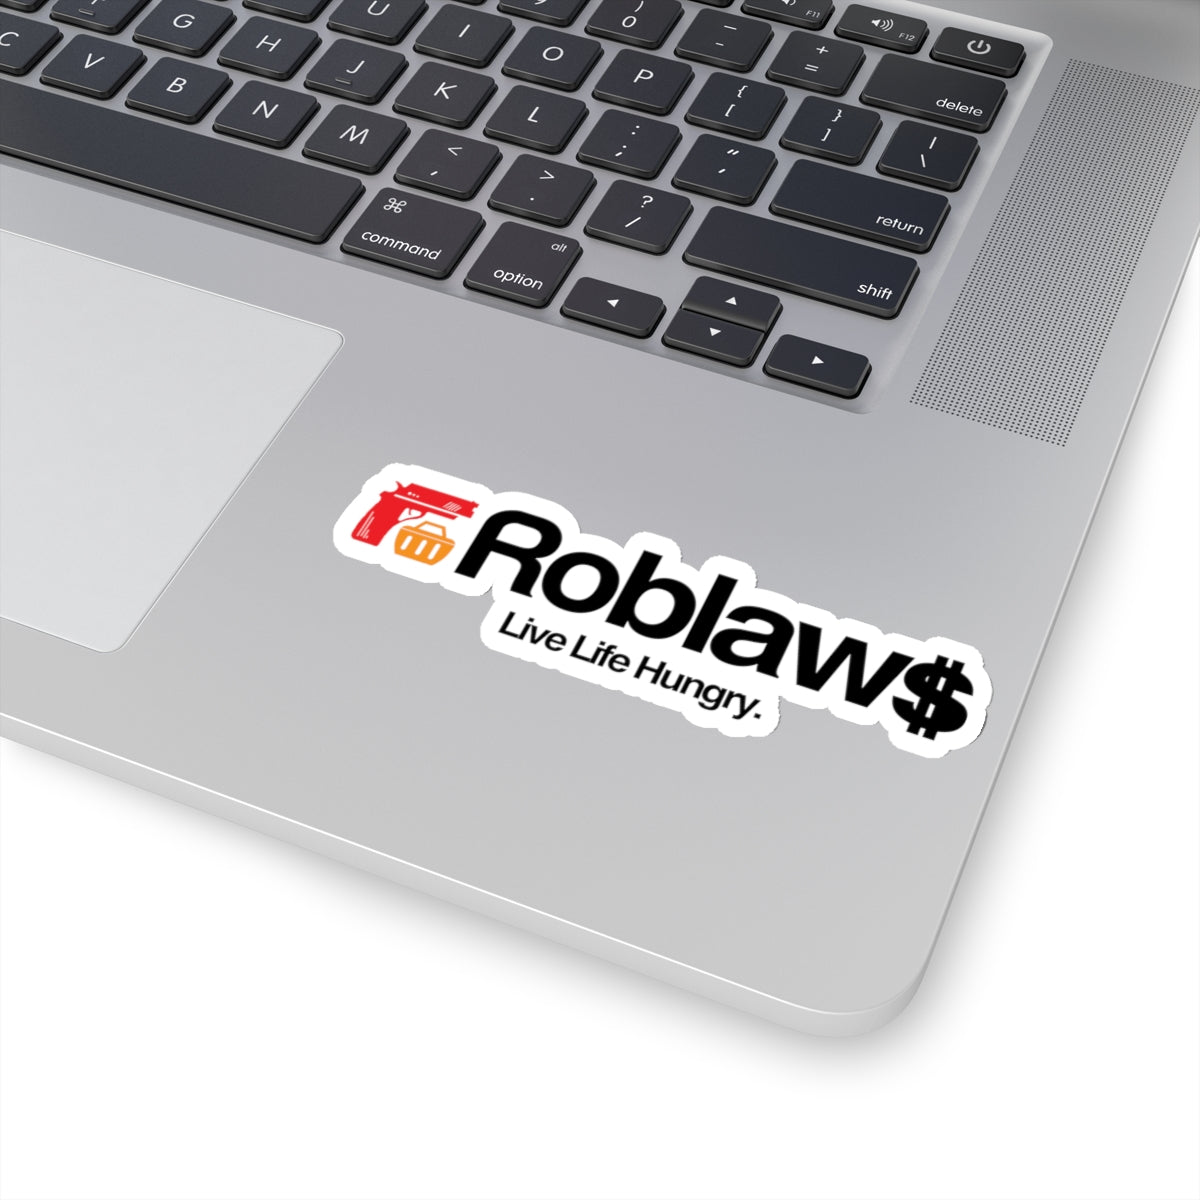 Roblaws Kiss-Cut Stickers